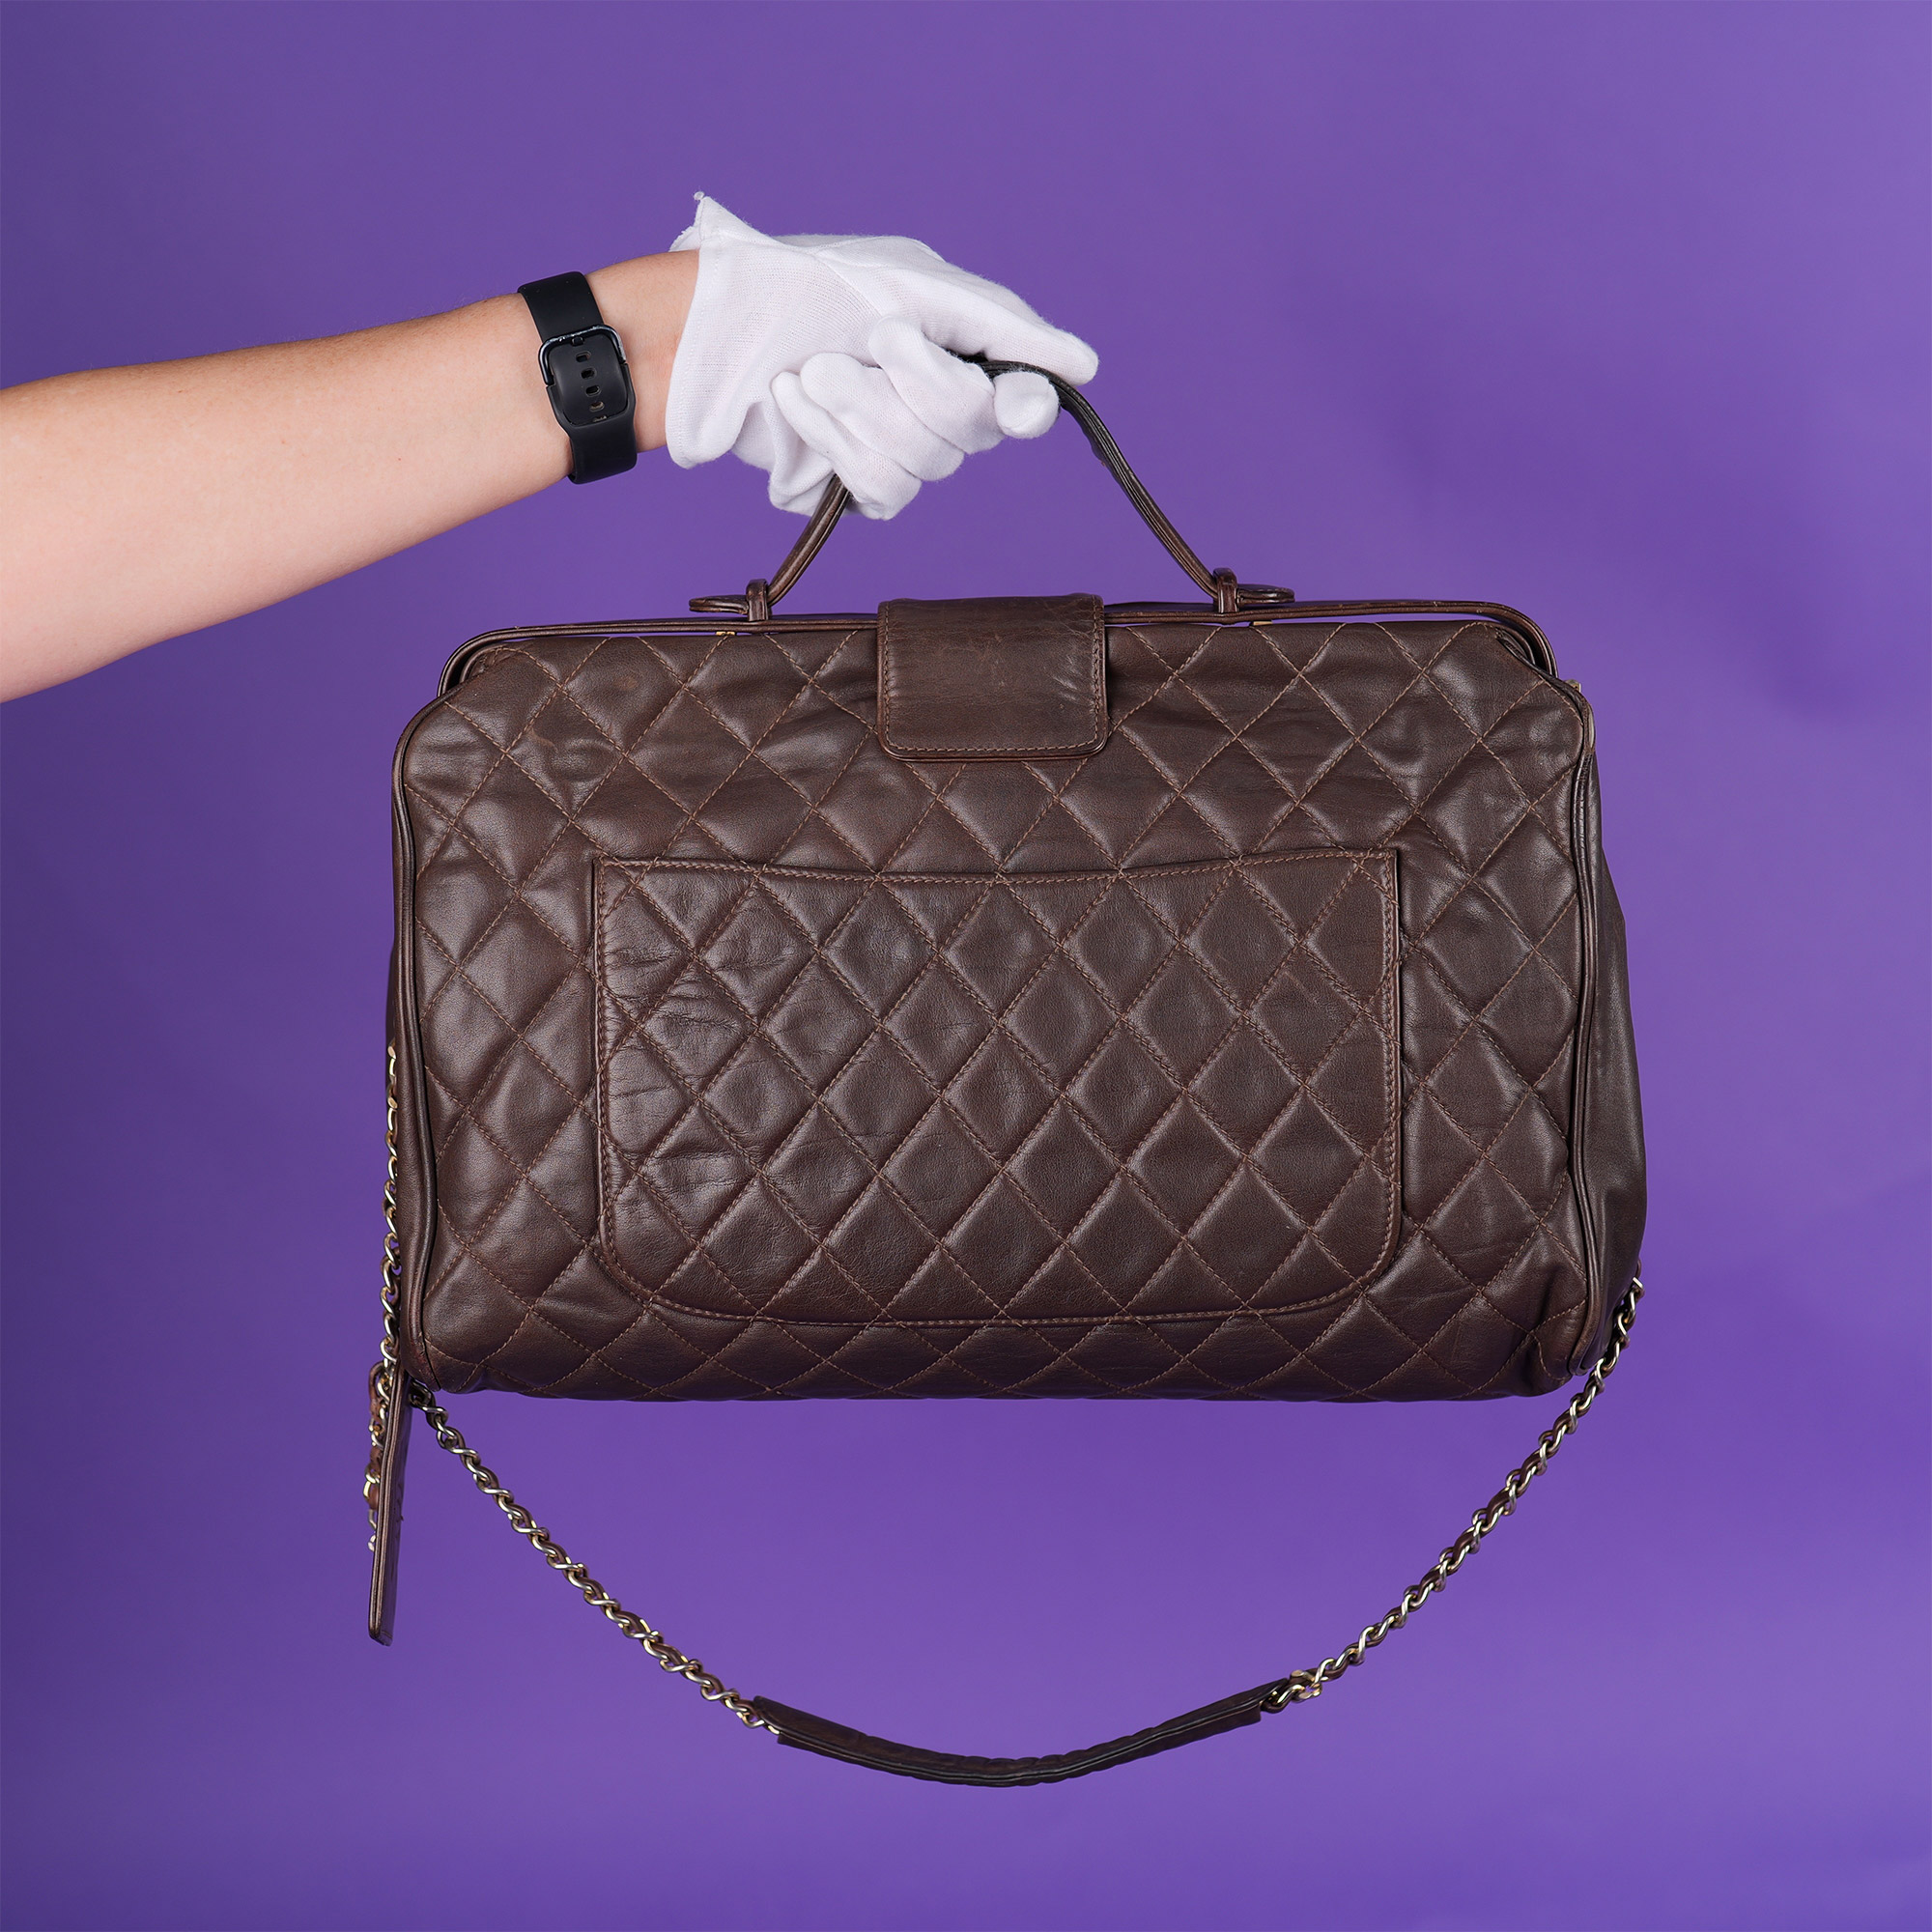 Authentic Chanel Brown Quilted Leather Large Doctor Bag - Image 6 of 13